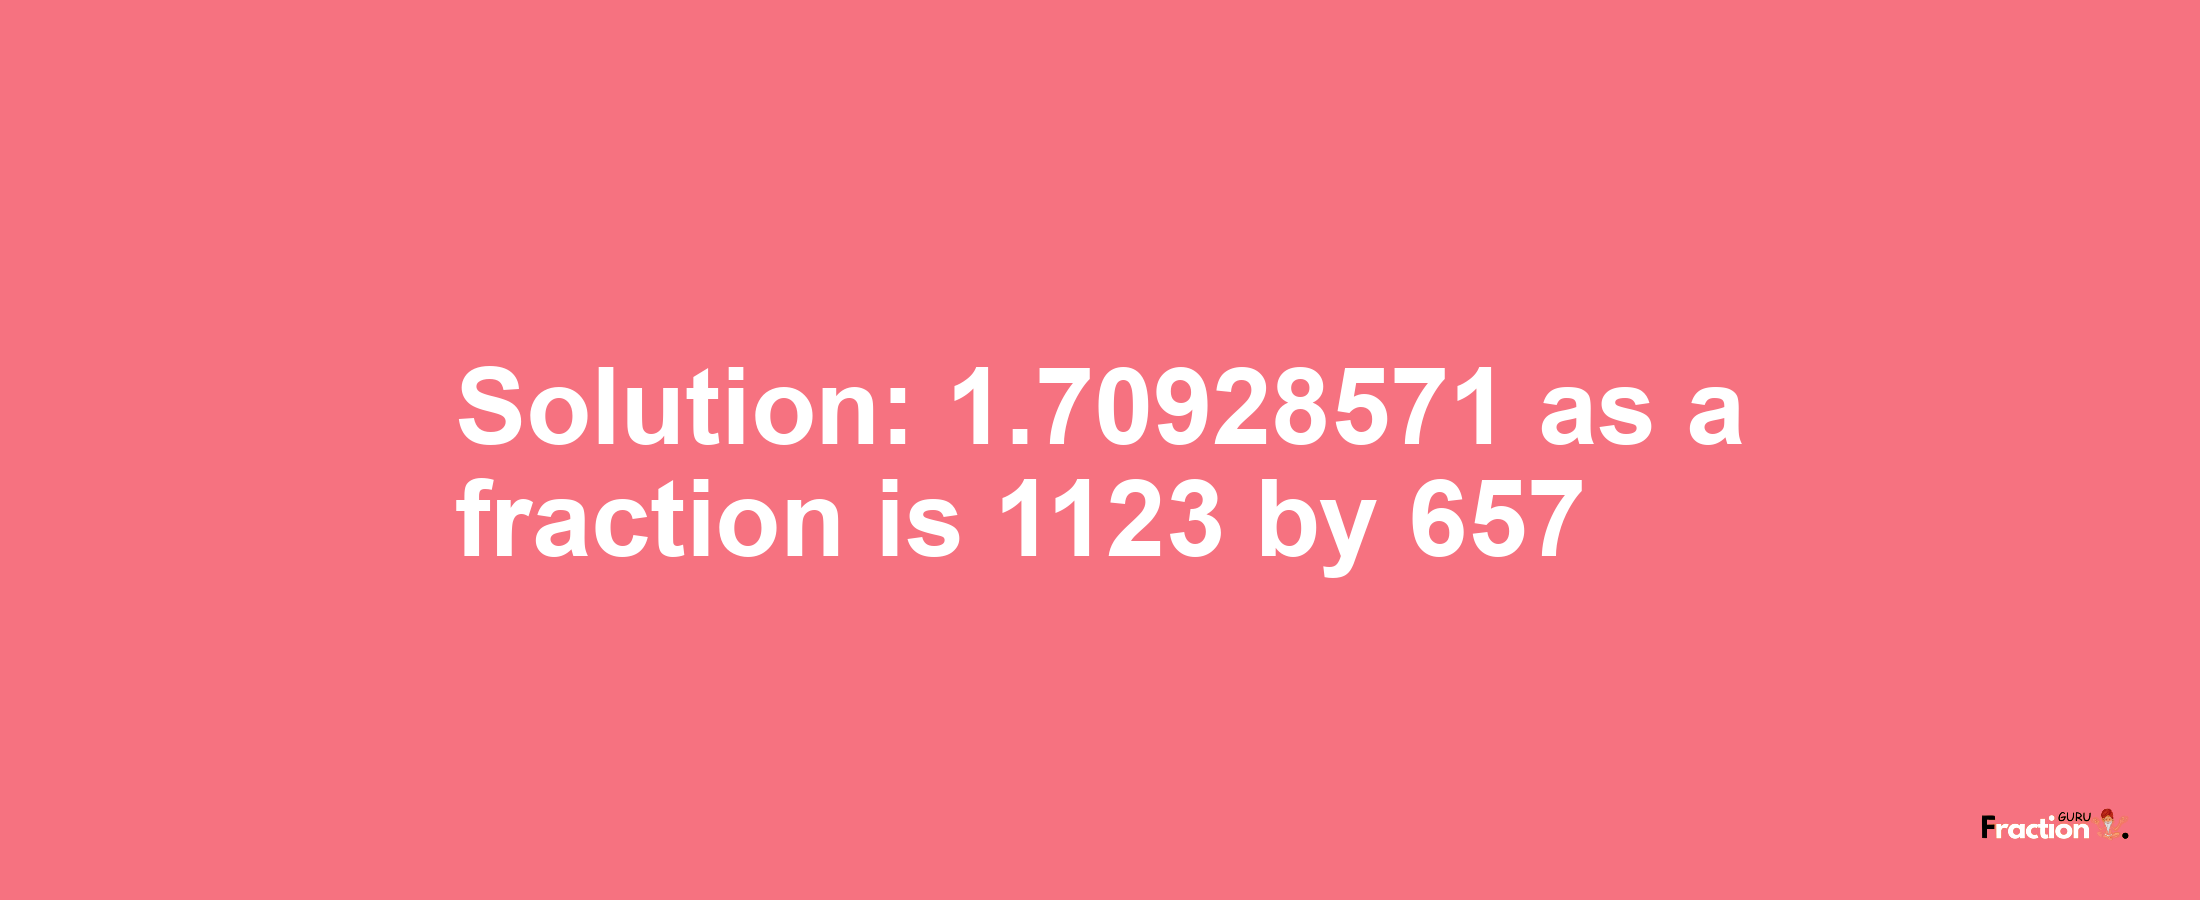 Solution:1.70928571 as a fraction is 1123/657